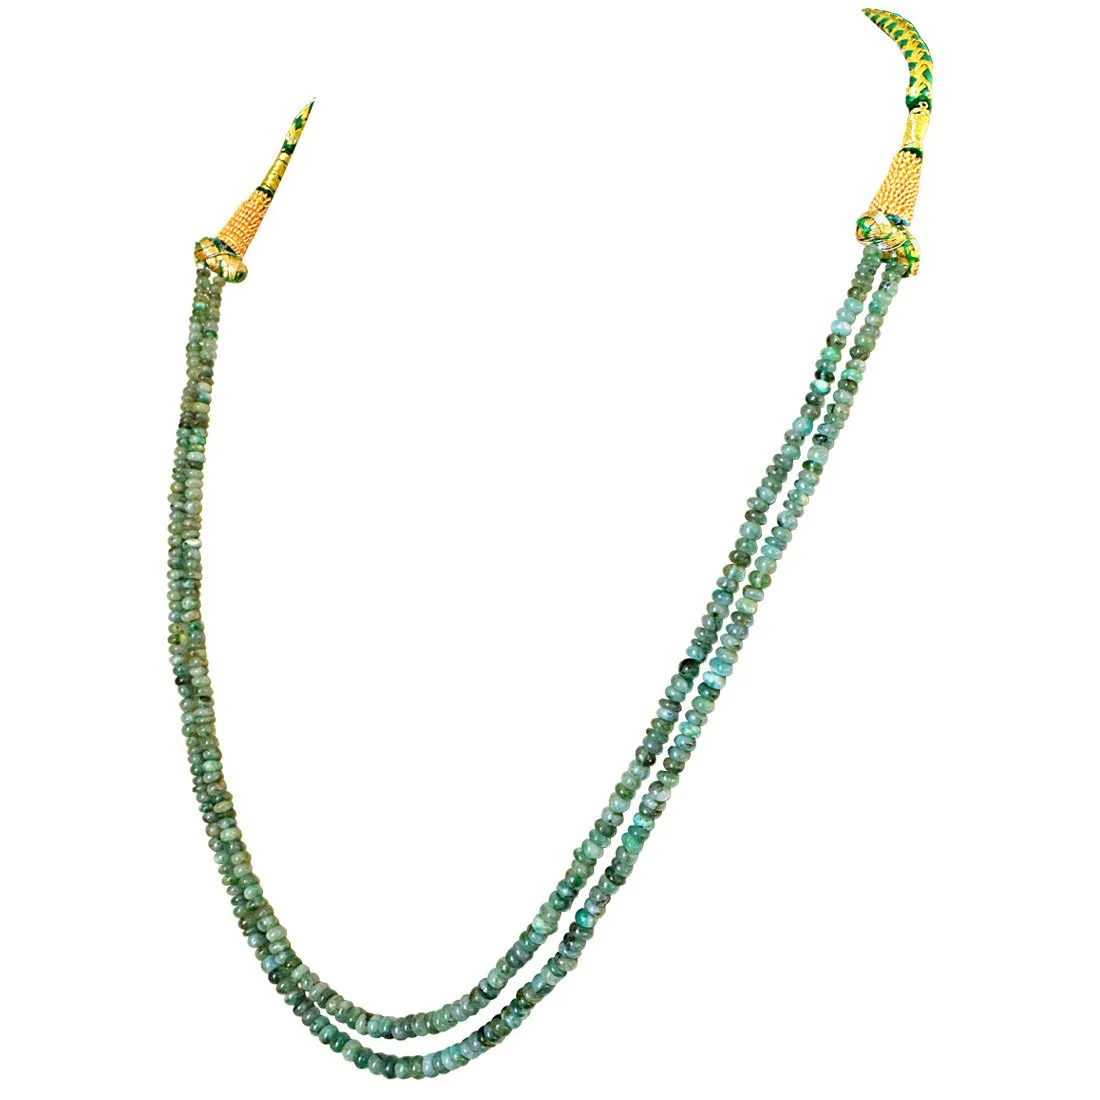 Two Line 83cts REAL Natural Green Emerald Beads Necklace for Women (83cts EMR Neck)